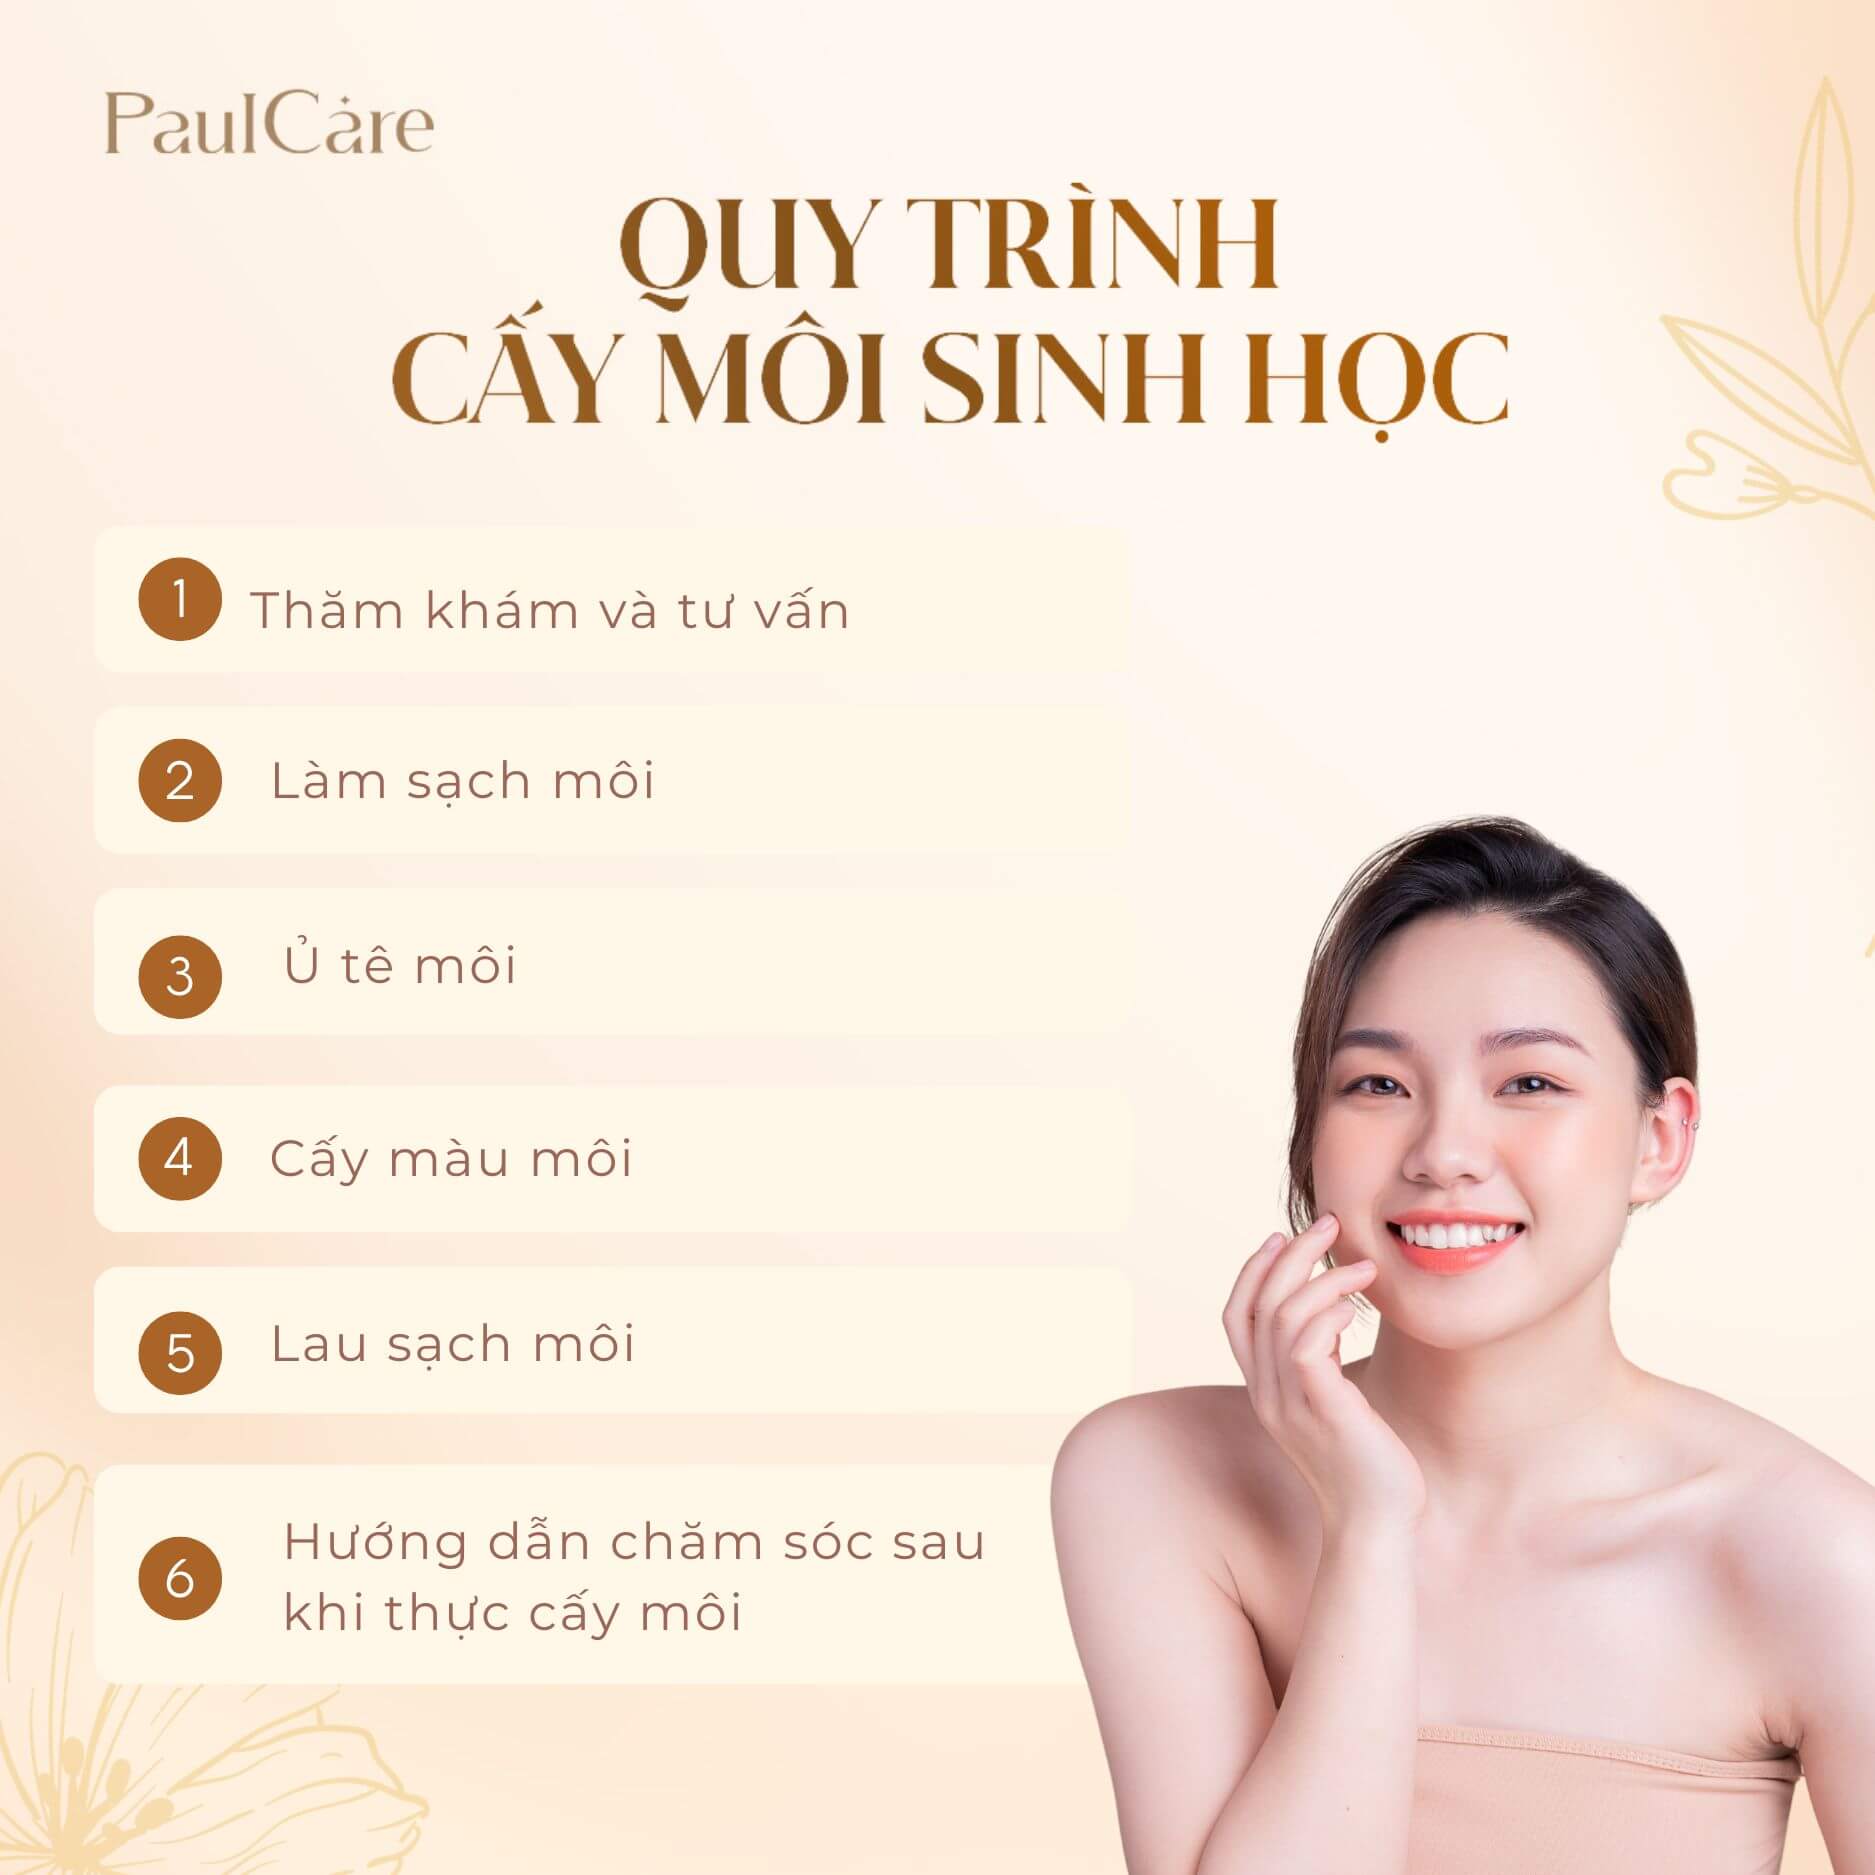 quy_trinh_cay_moi_sinh_hoc_paulcare